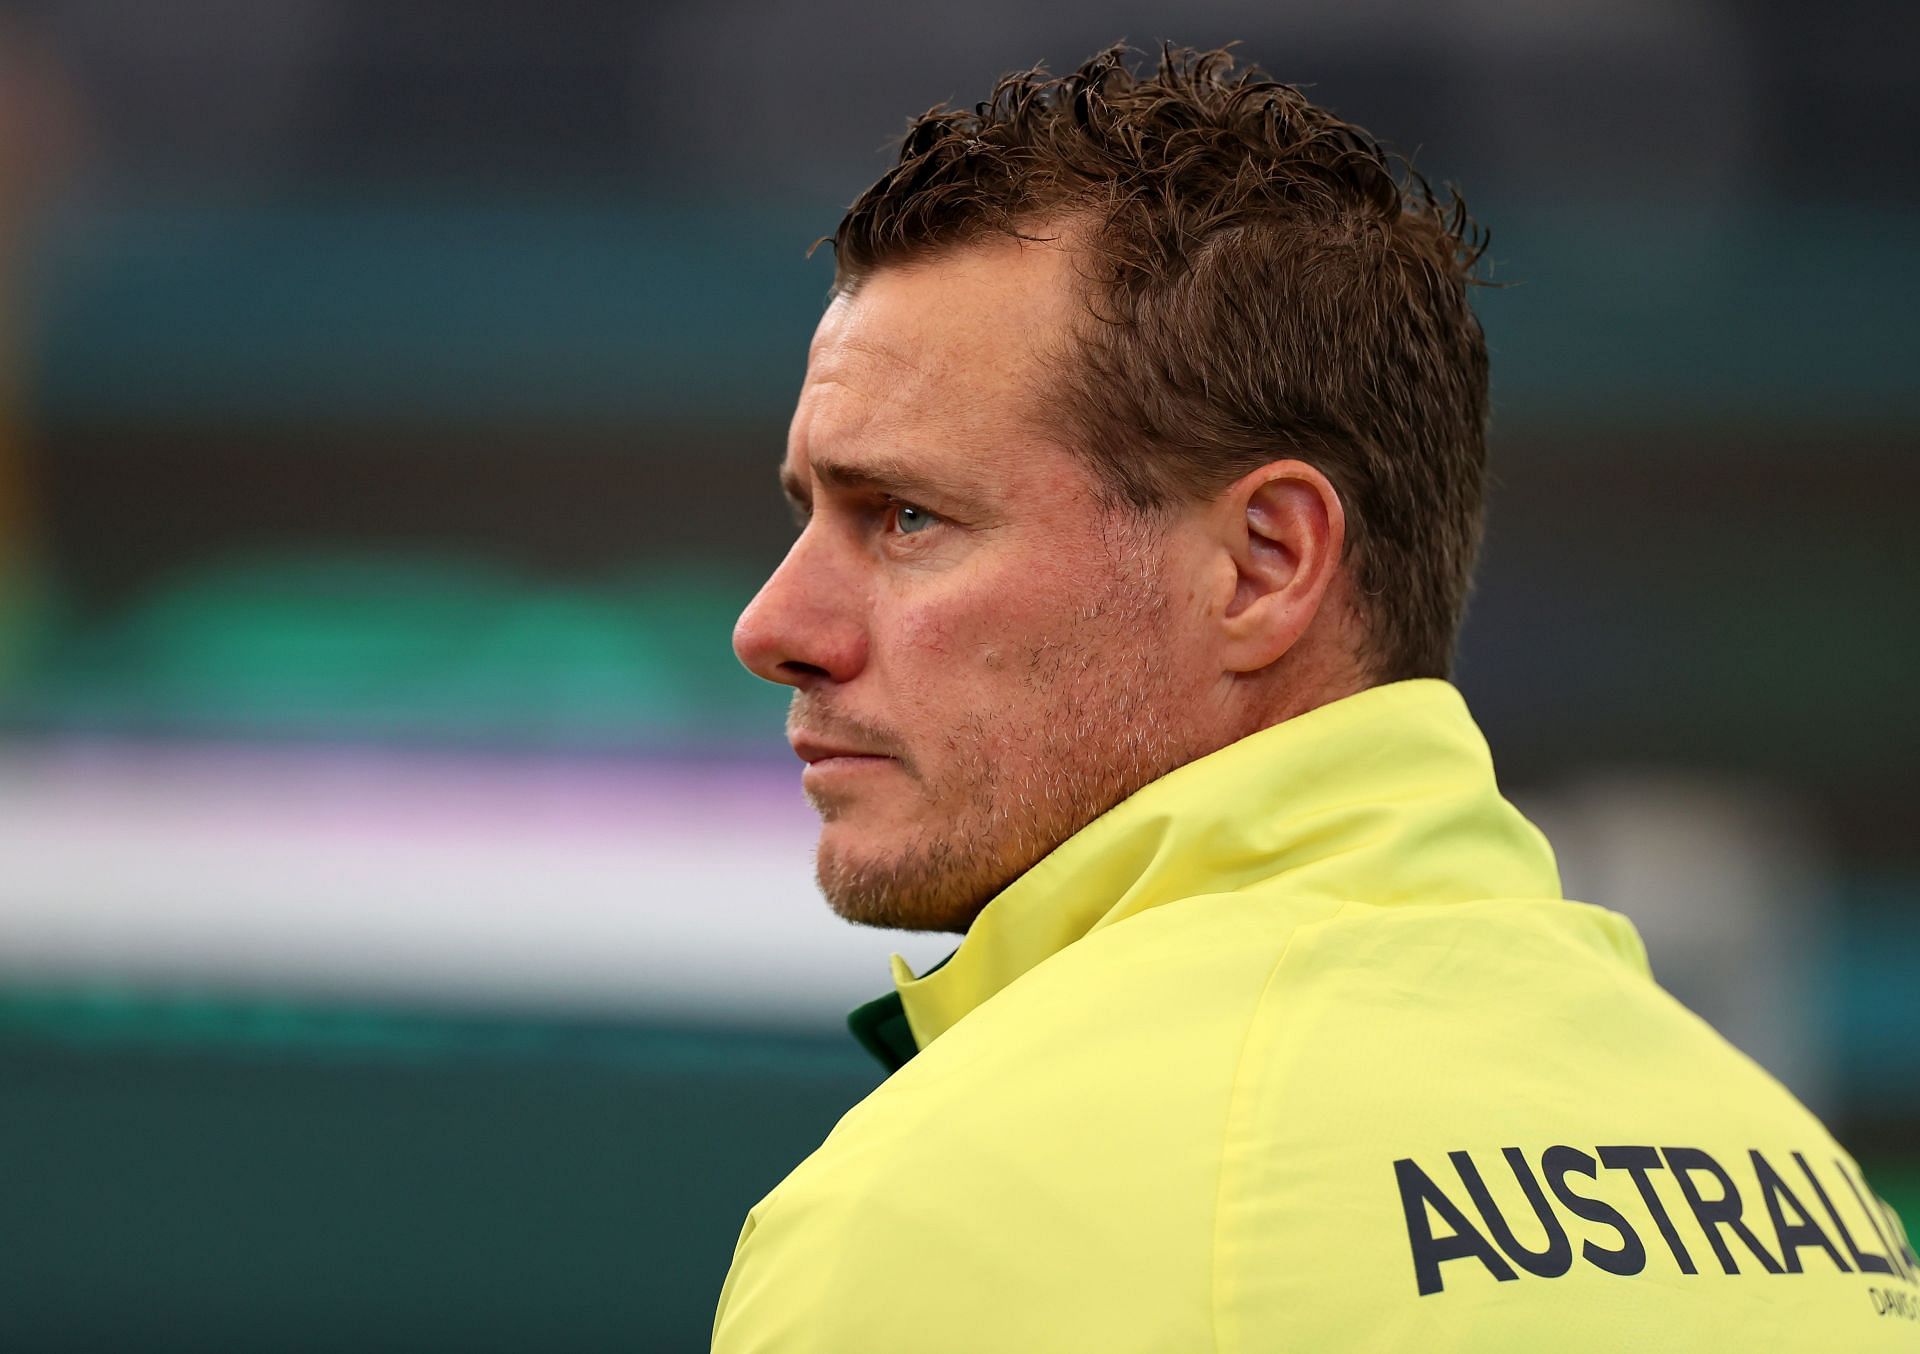 Lleyton Hewitt during the Davis Cup group-stage tie between Germany and Australia